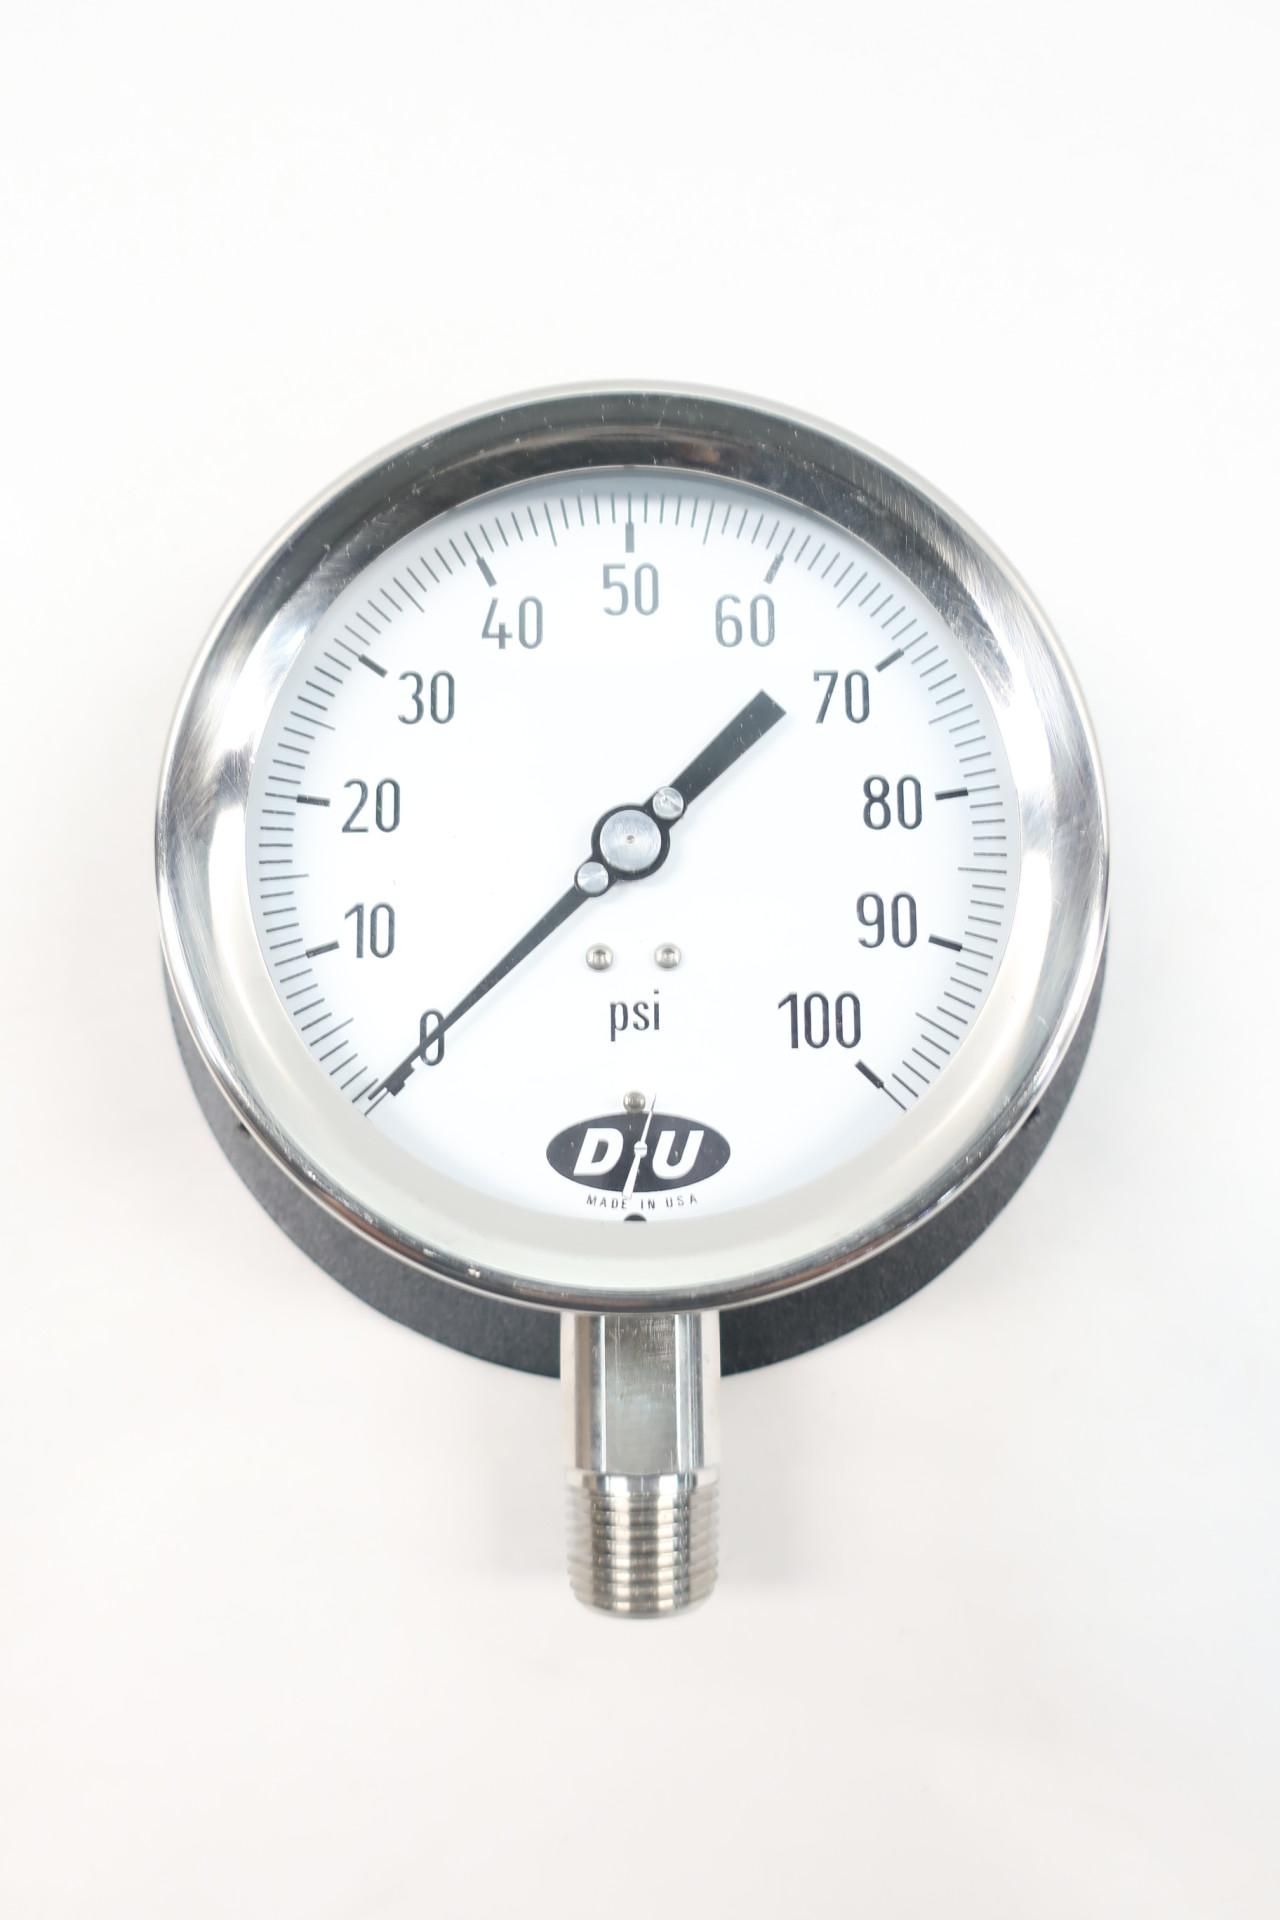 Duro Instruments 6” Pressure Gauge PSI Stainless Glass #442Y37 Heavy Duty NEW 